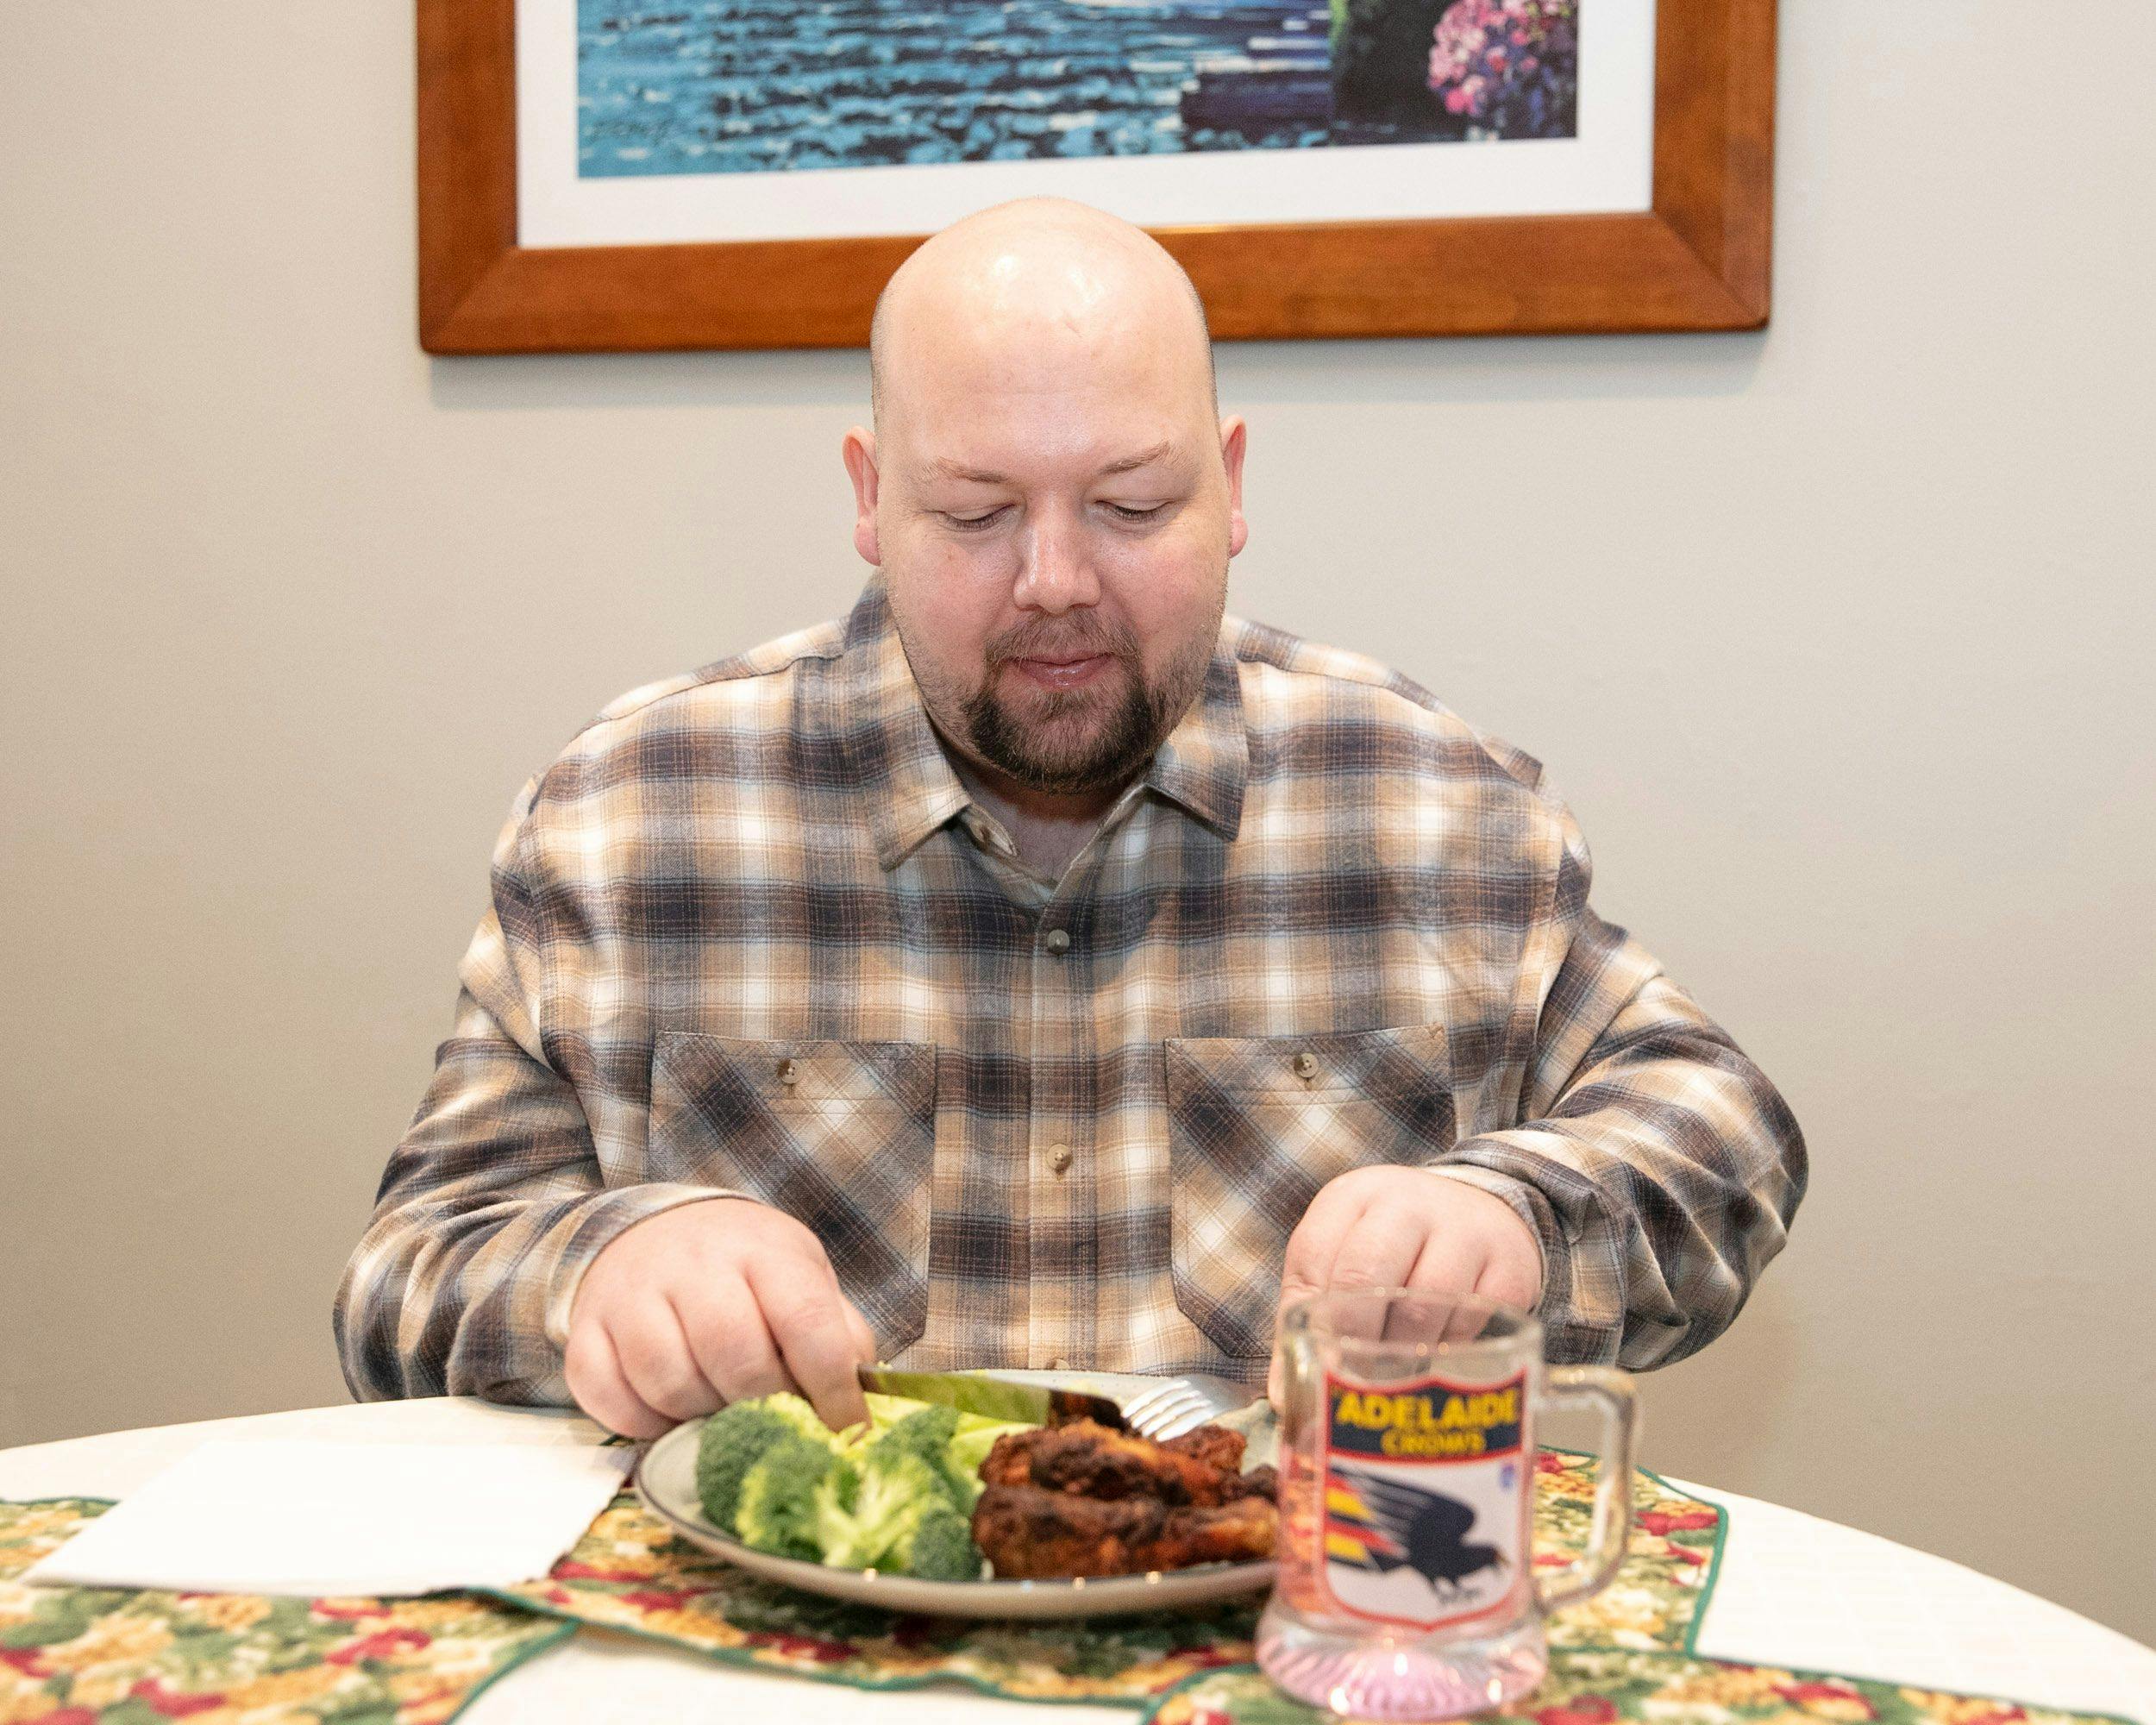 Man eating a meal